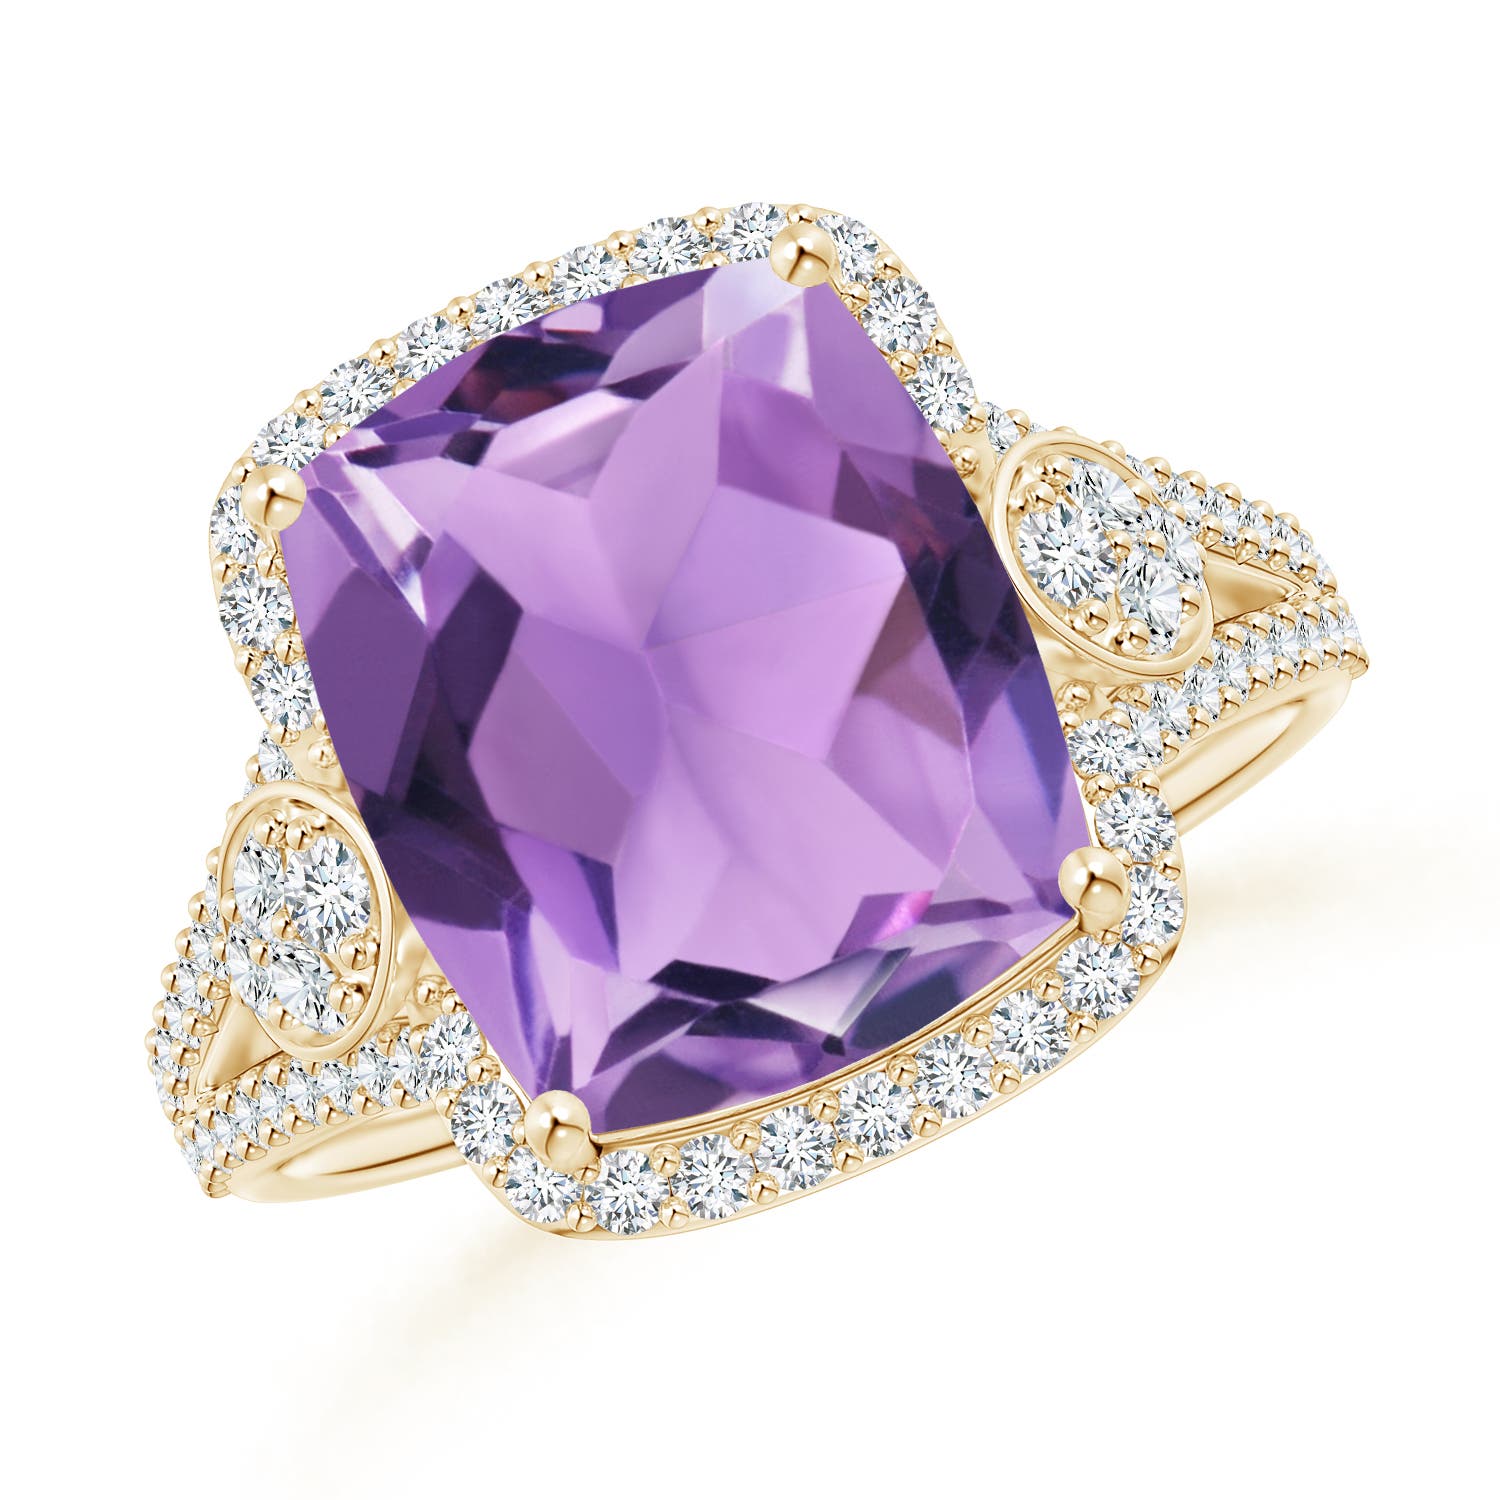 A - Amethyst / 5.06 CT / 14 KT Yellow Gold